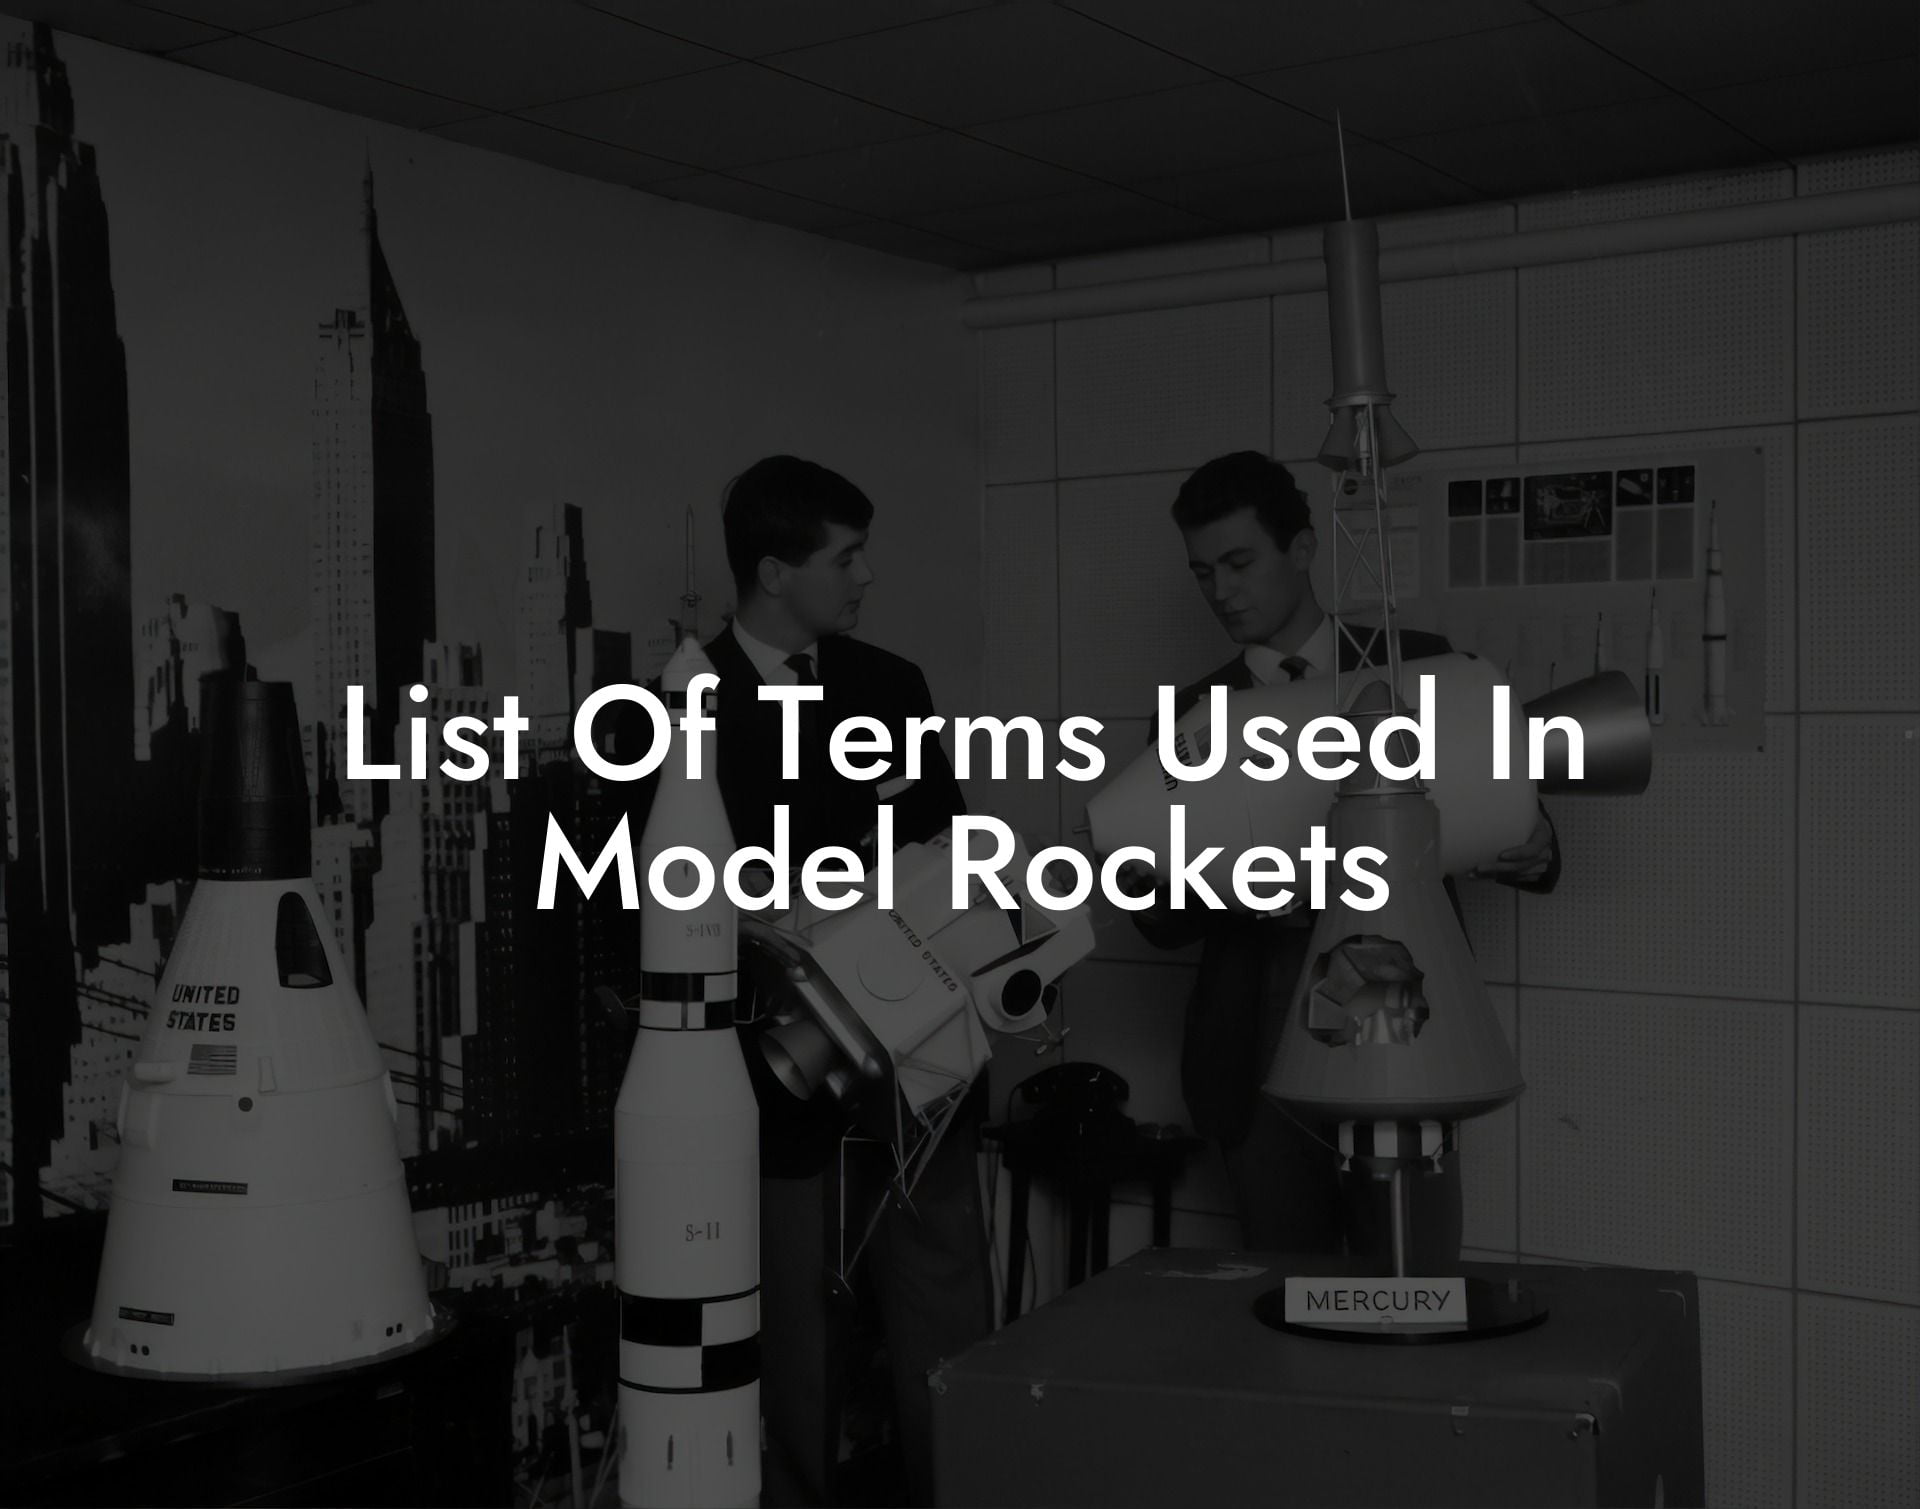 List Of Terms Used In Model Rockets